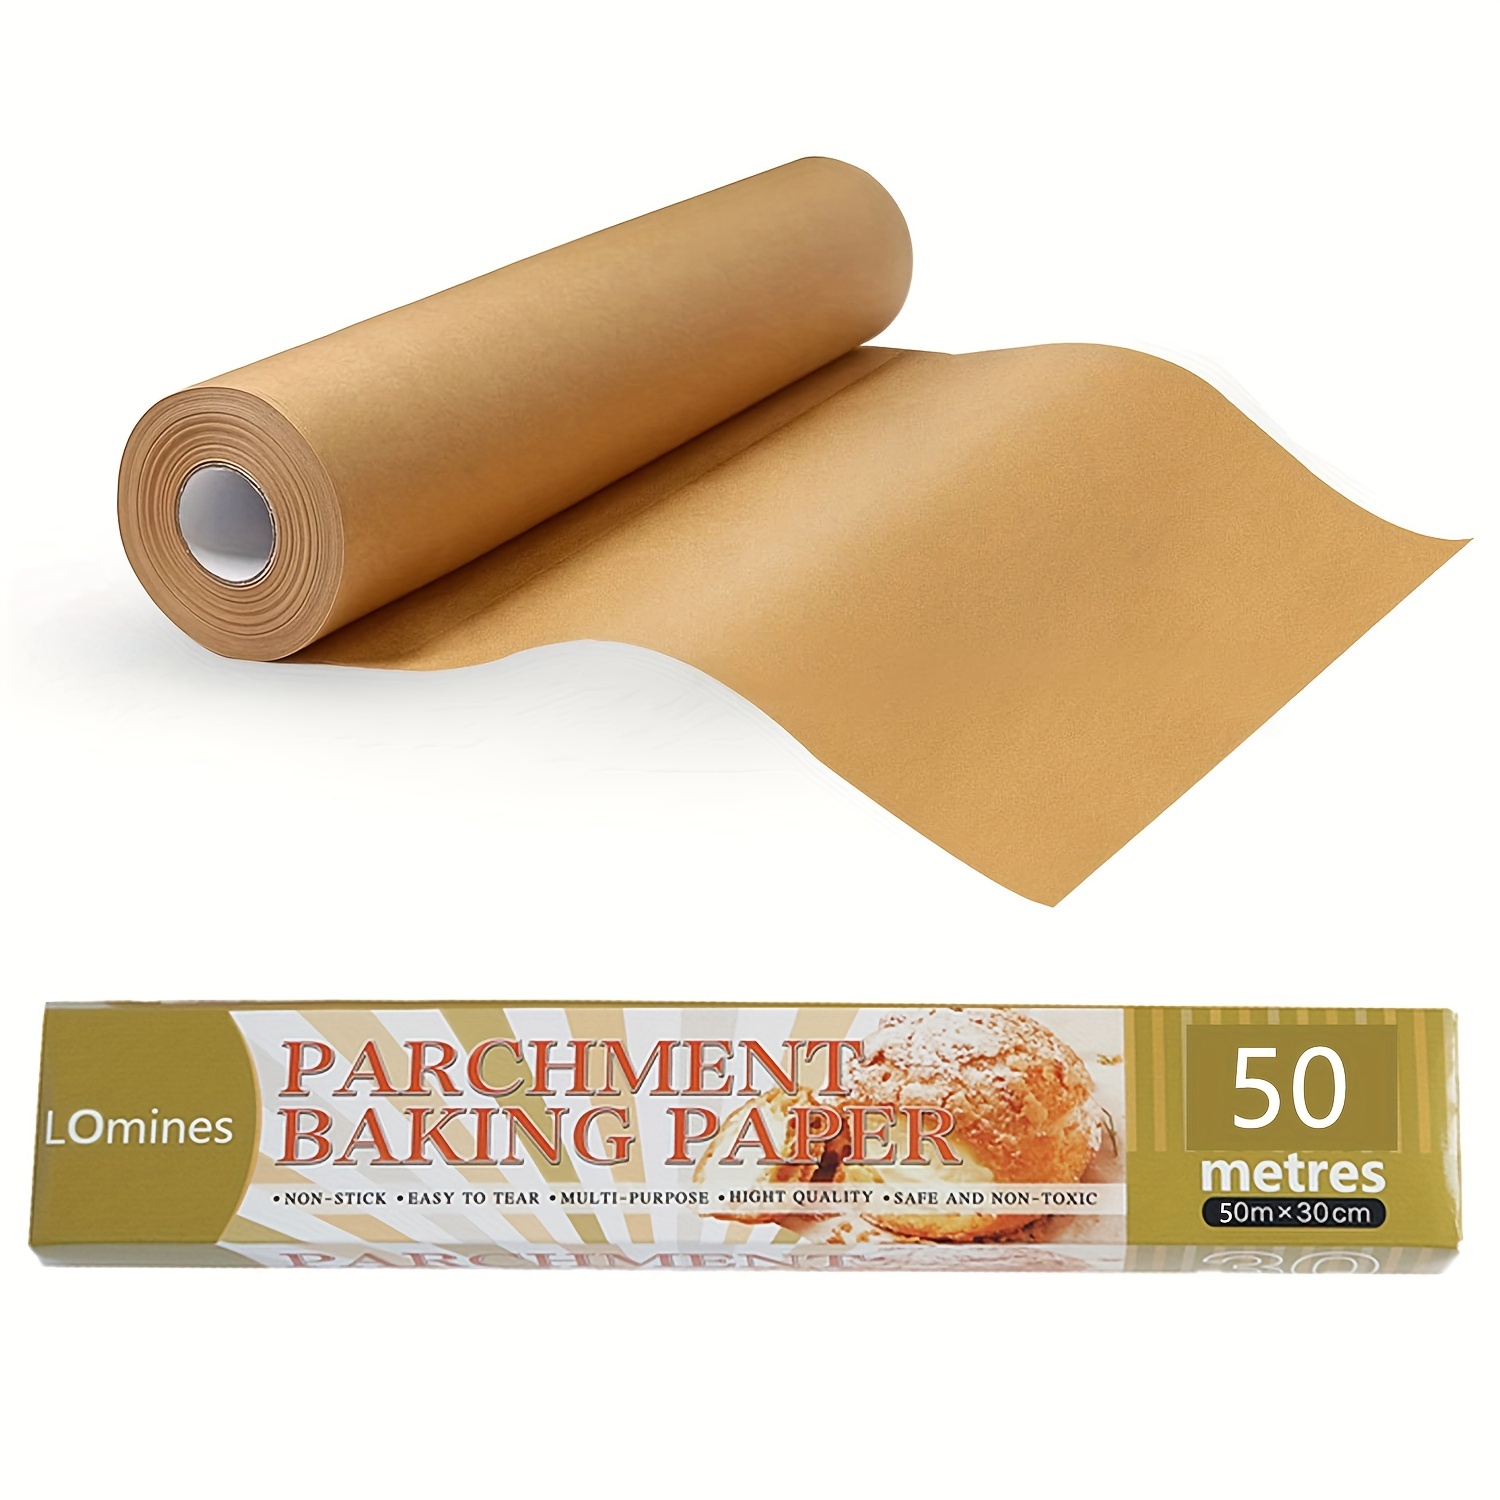 Parchment Paper Makes Any Pan a Nonstick Pan